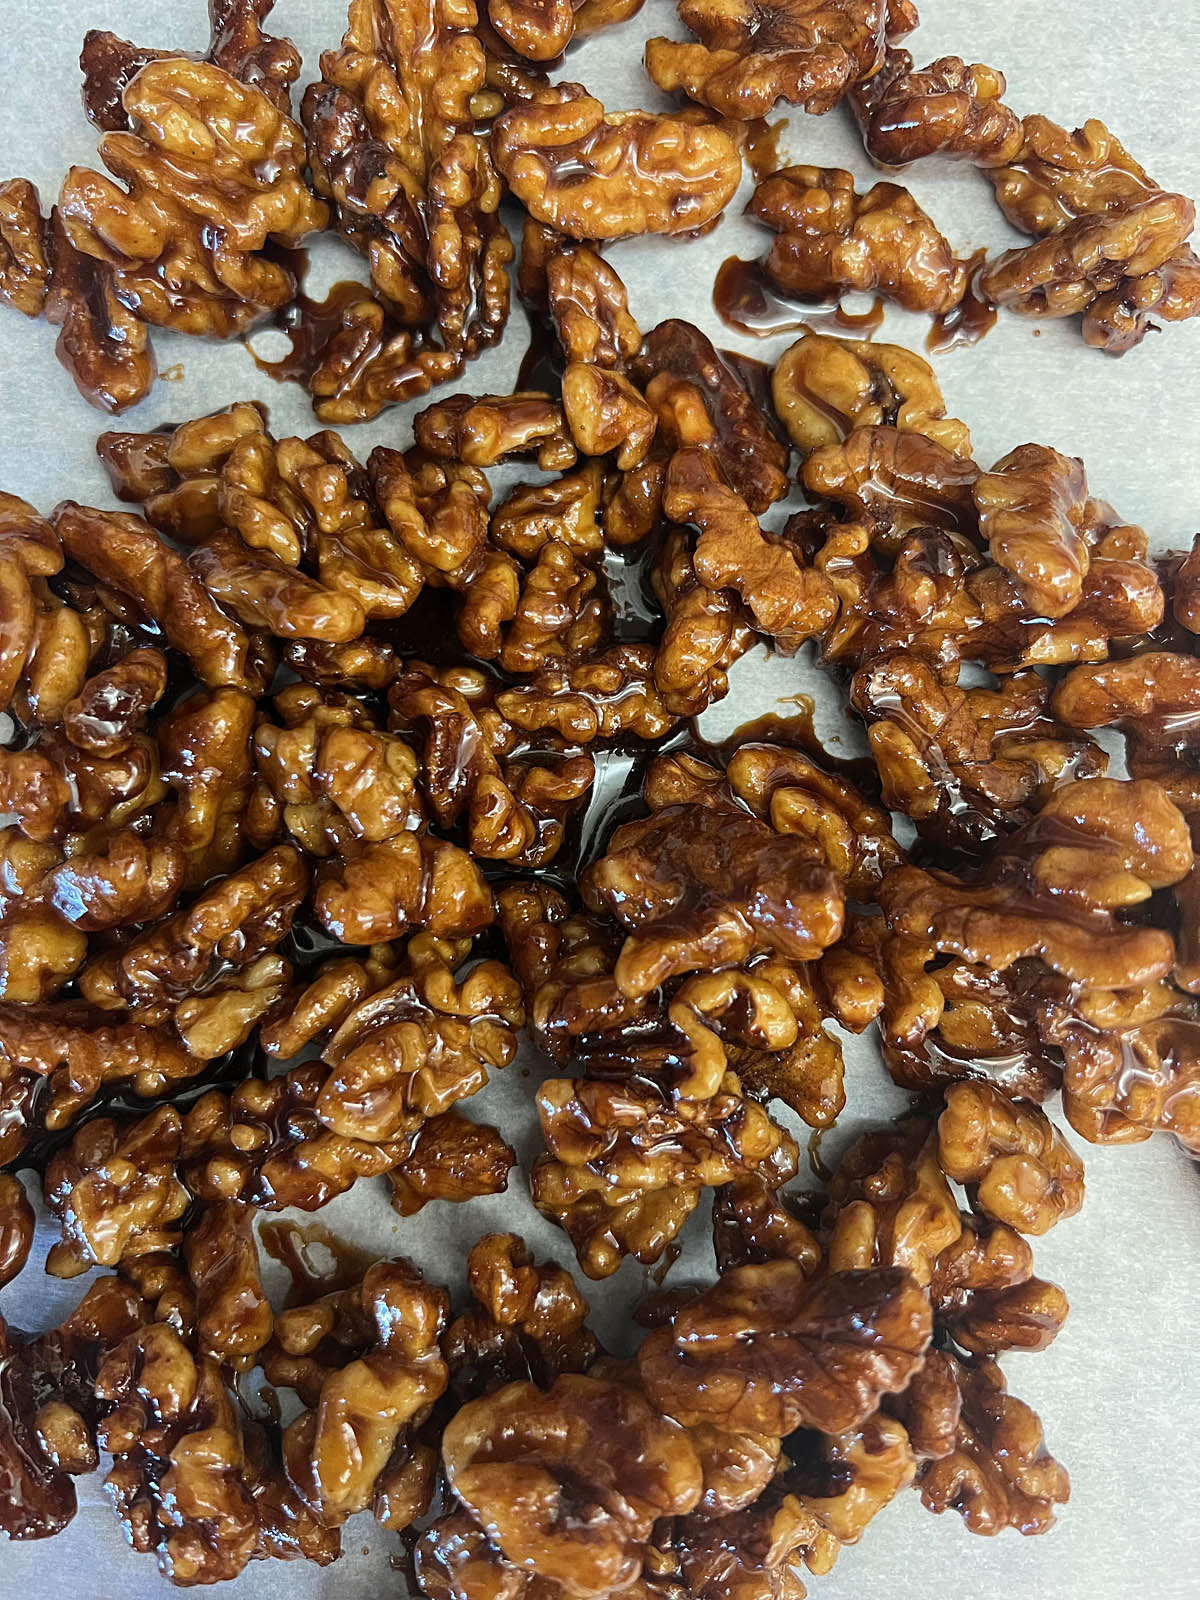 Candied walnuts spread on parchment paper.